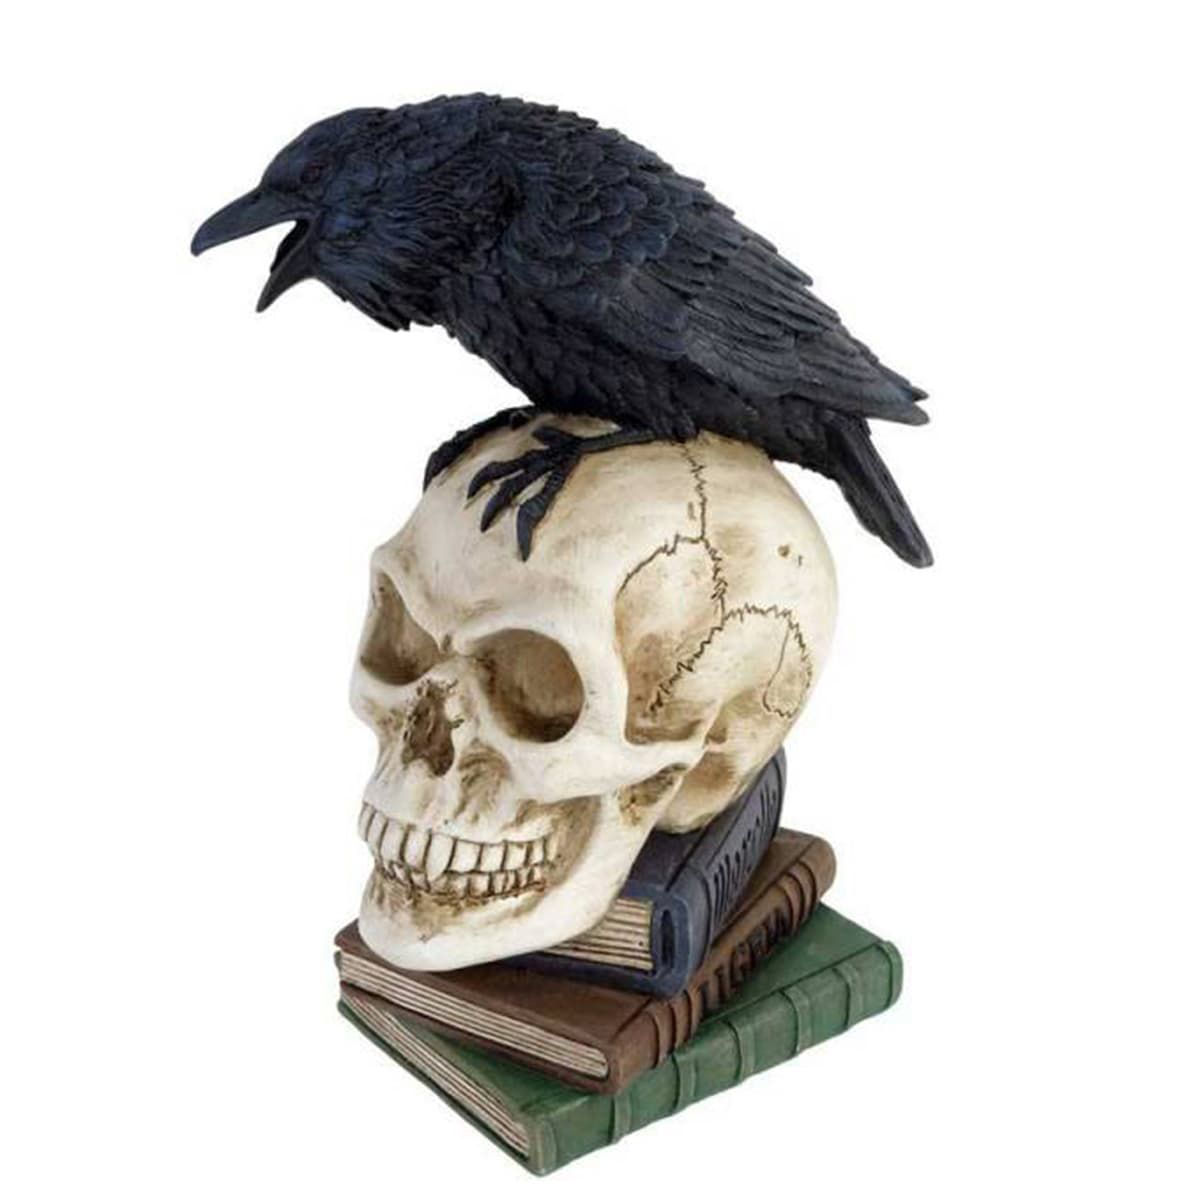 hand-painted cold-cast resin Raven sculpture depicts Poe's symbol of mournfulness atop a skull on a stack of books, nevermore